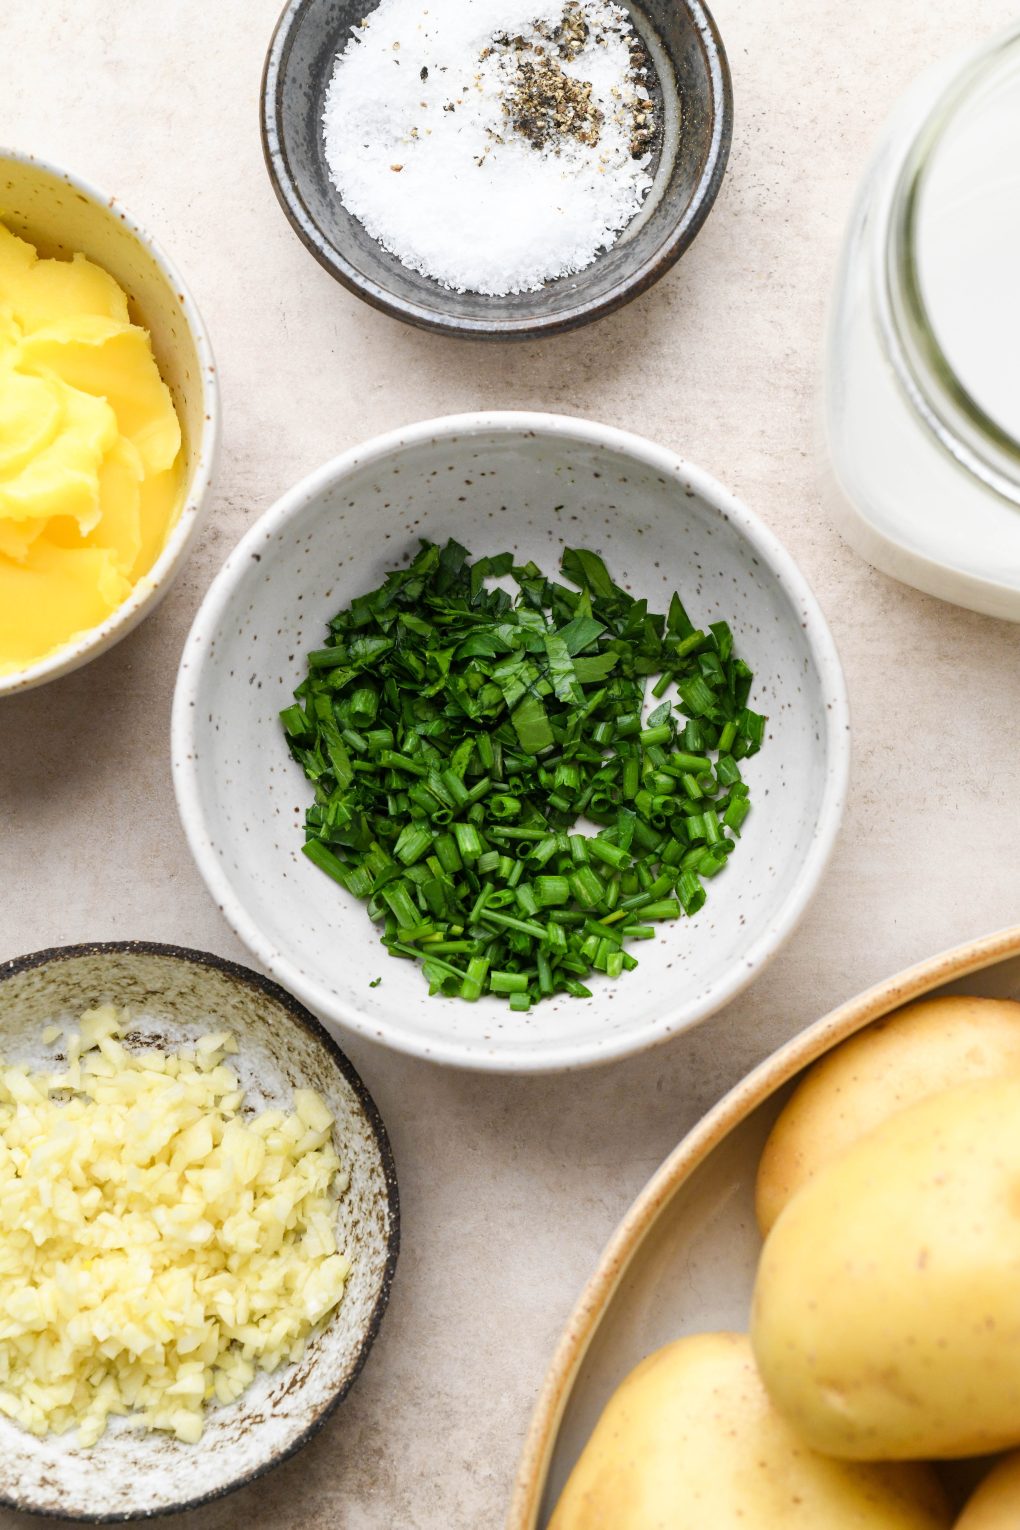 Ingredients for Whole30 mashed potatoes - overhead view of a small bowl of herbs, ghee, salt and pepper, chopped garlic, and a jar of dairy free milk.